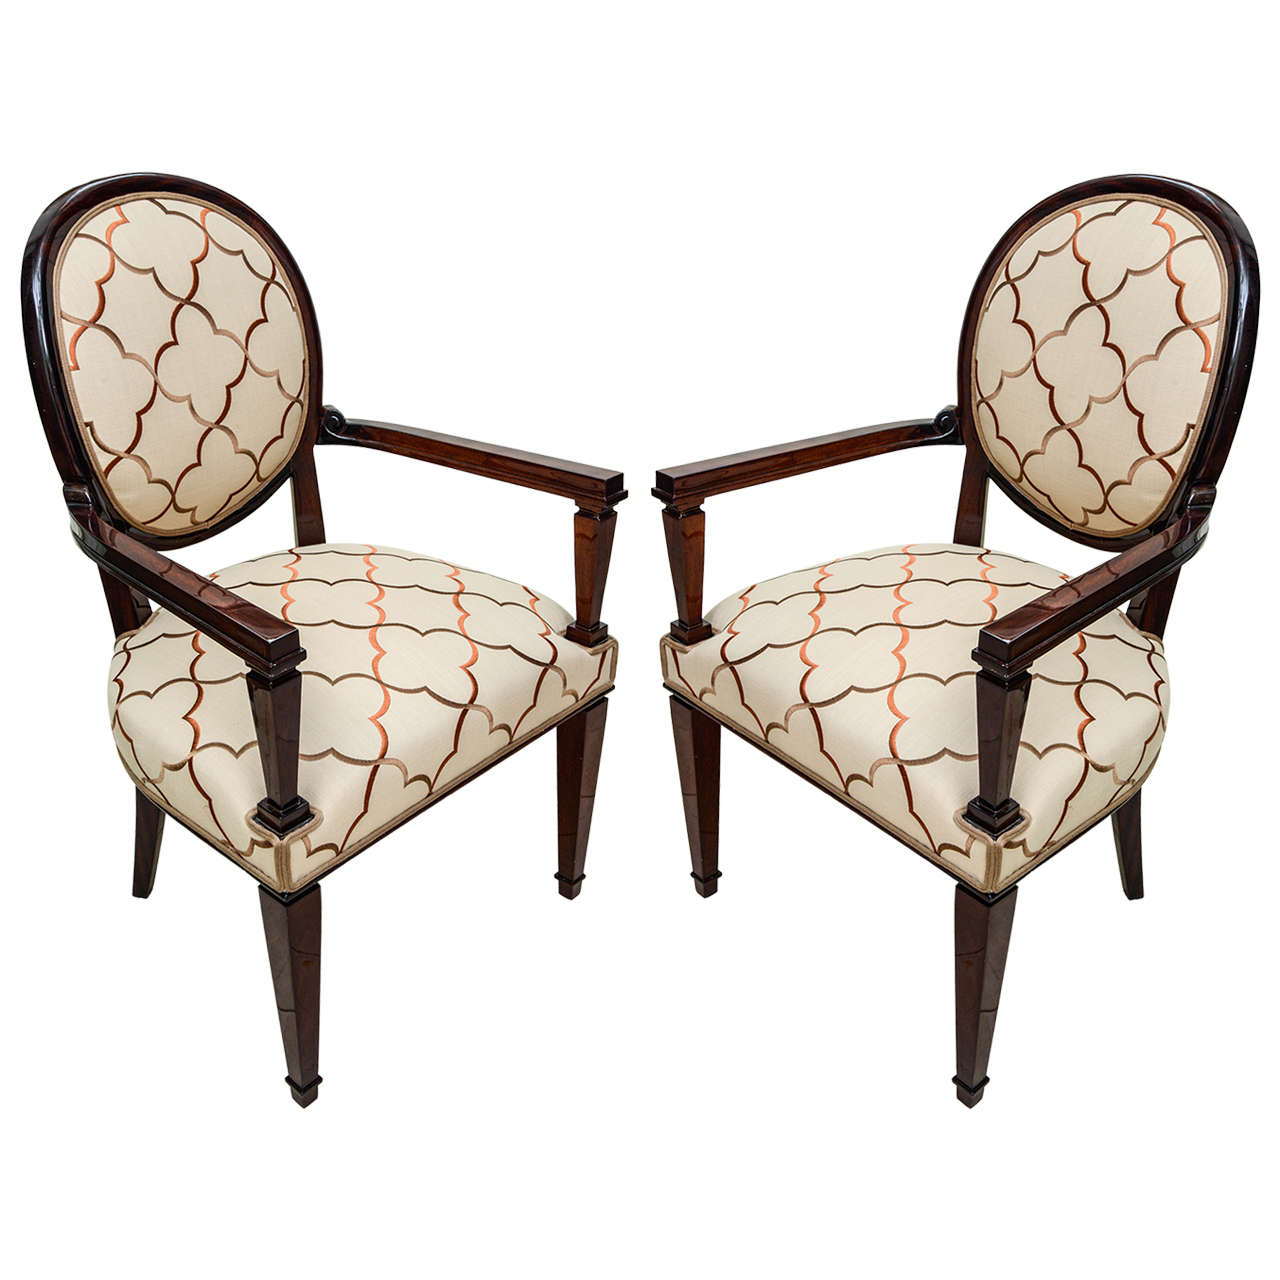 Fabulous André Arbus, Pair of Armchairs For Sale